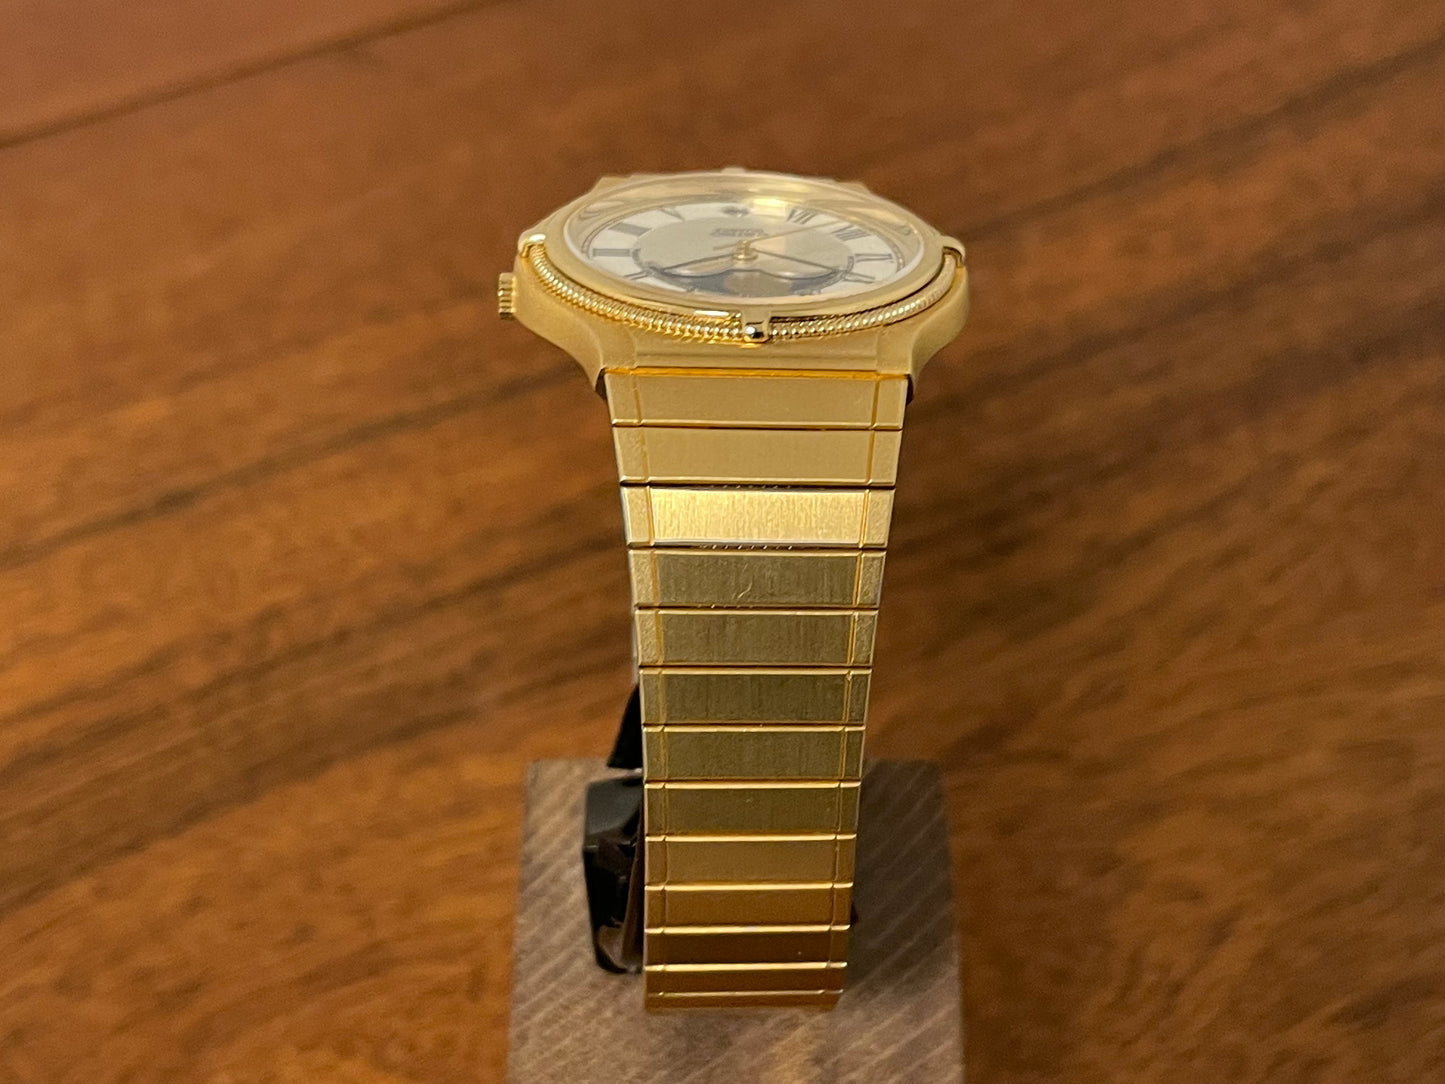 (1985) Seiko 7434-6010 gold colored dress watch with moon phase (NOS)